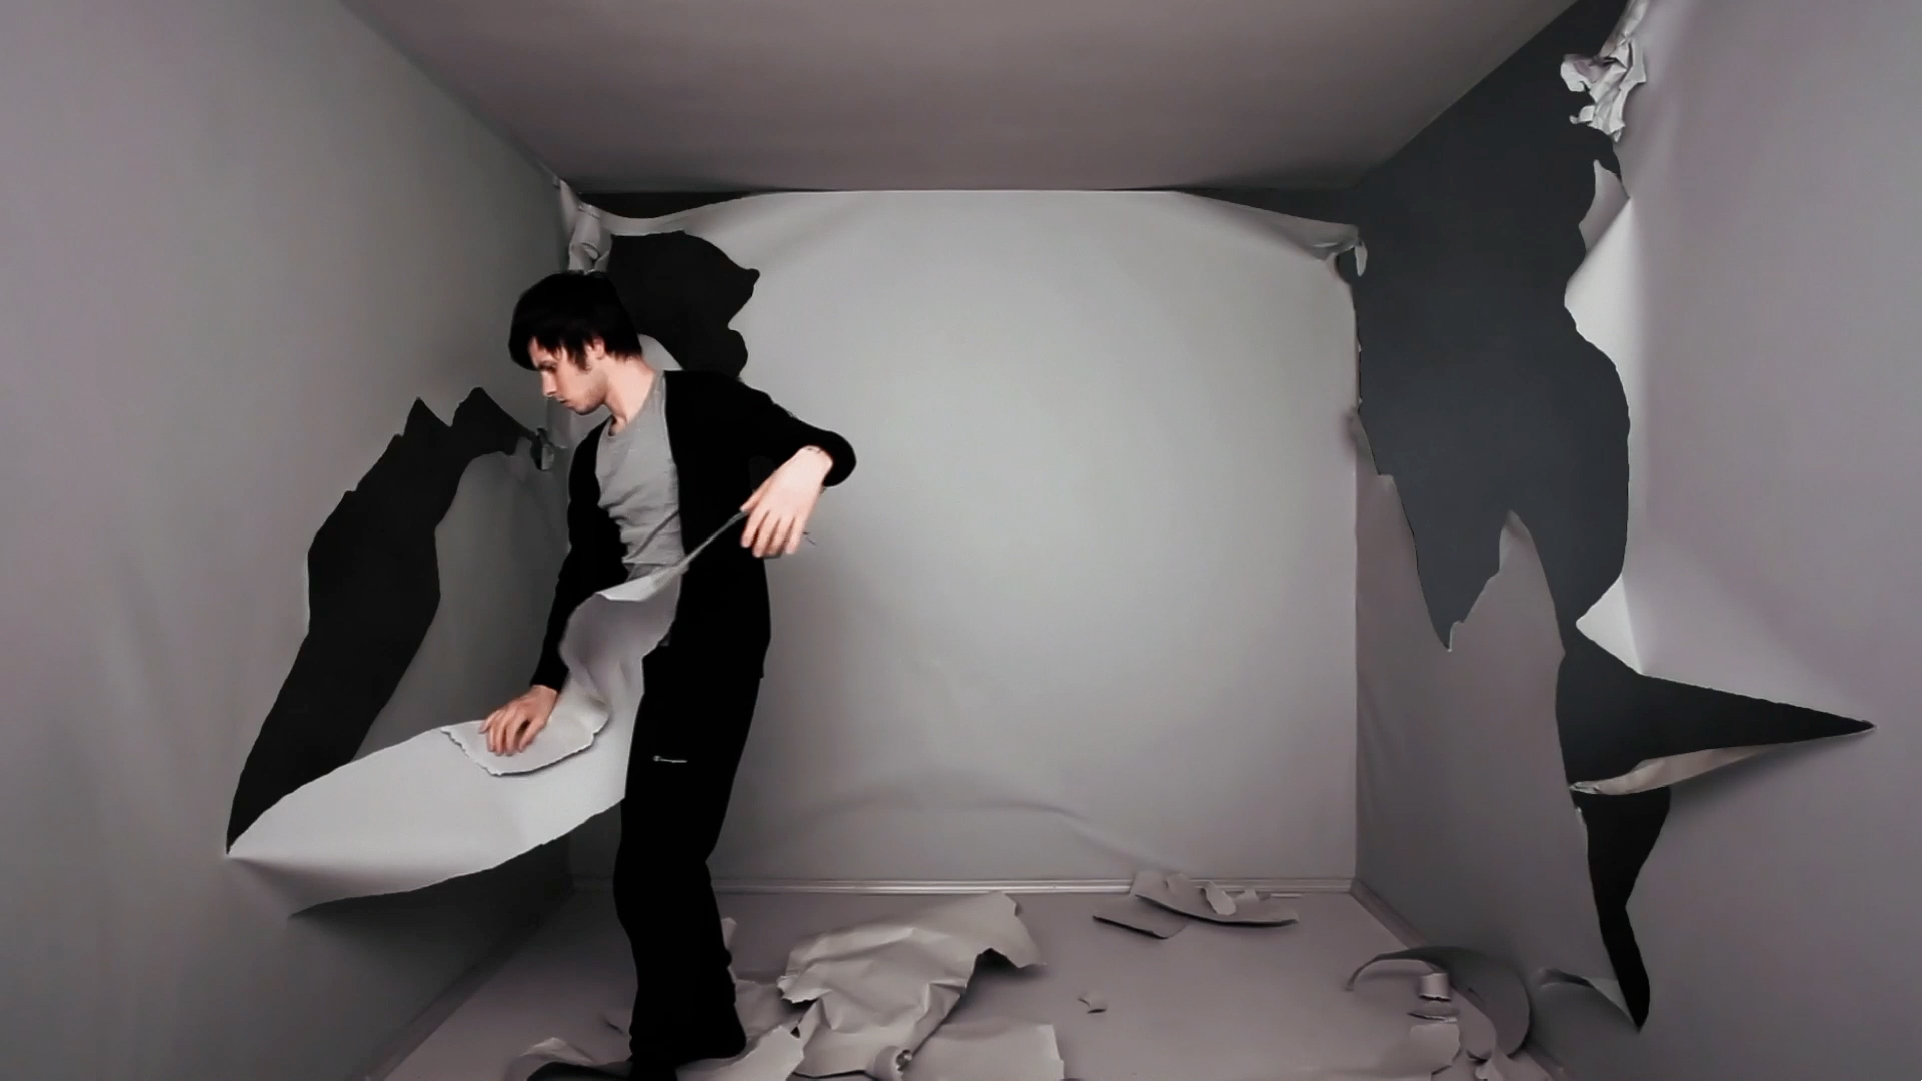 Still from the Hollow Domain video, 2010. The video is a visual metaphor of existential freedom, predominance of essence over existence, and conditionality of boundaries